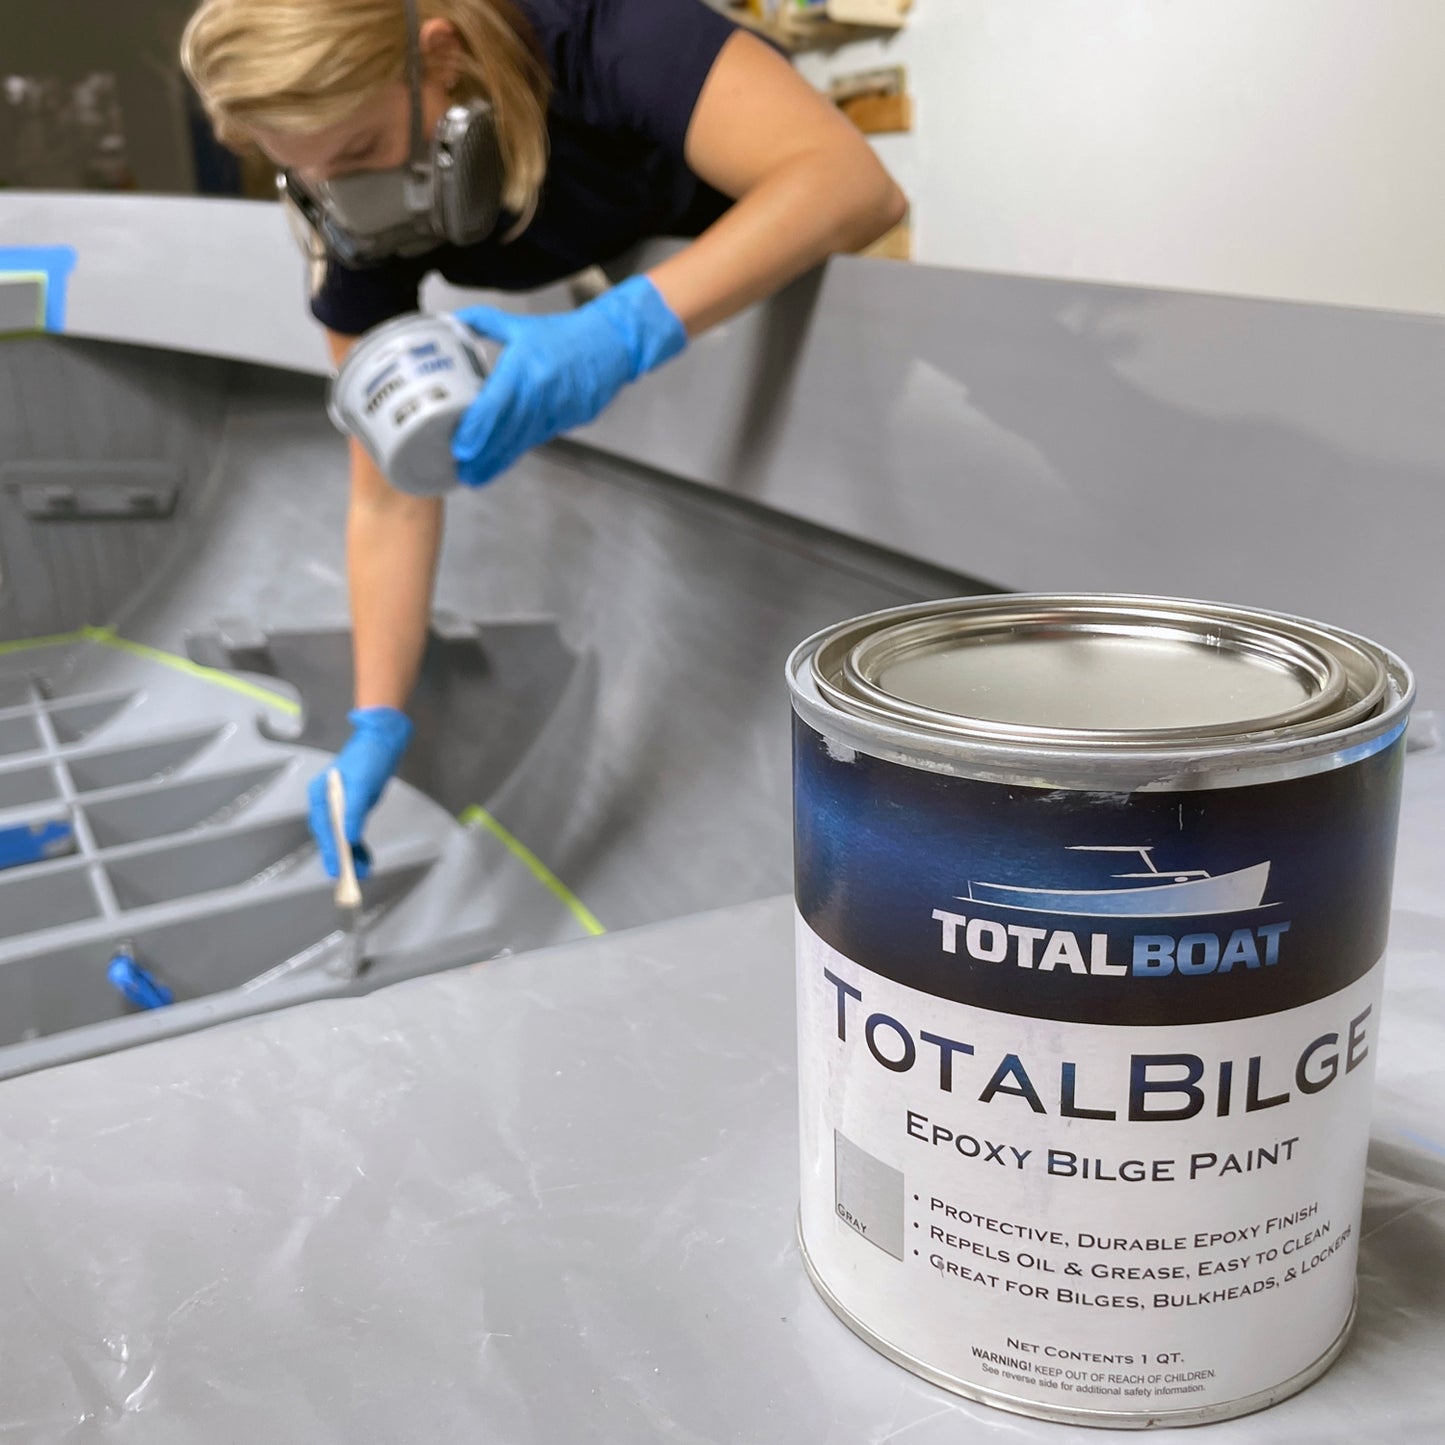 TotalBoat TotalBilge Epoxy Bilge Paint being applied to the inside of a boat